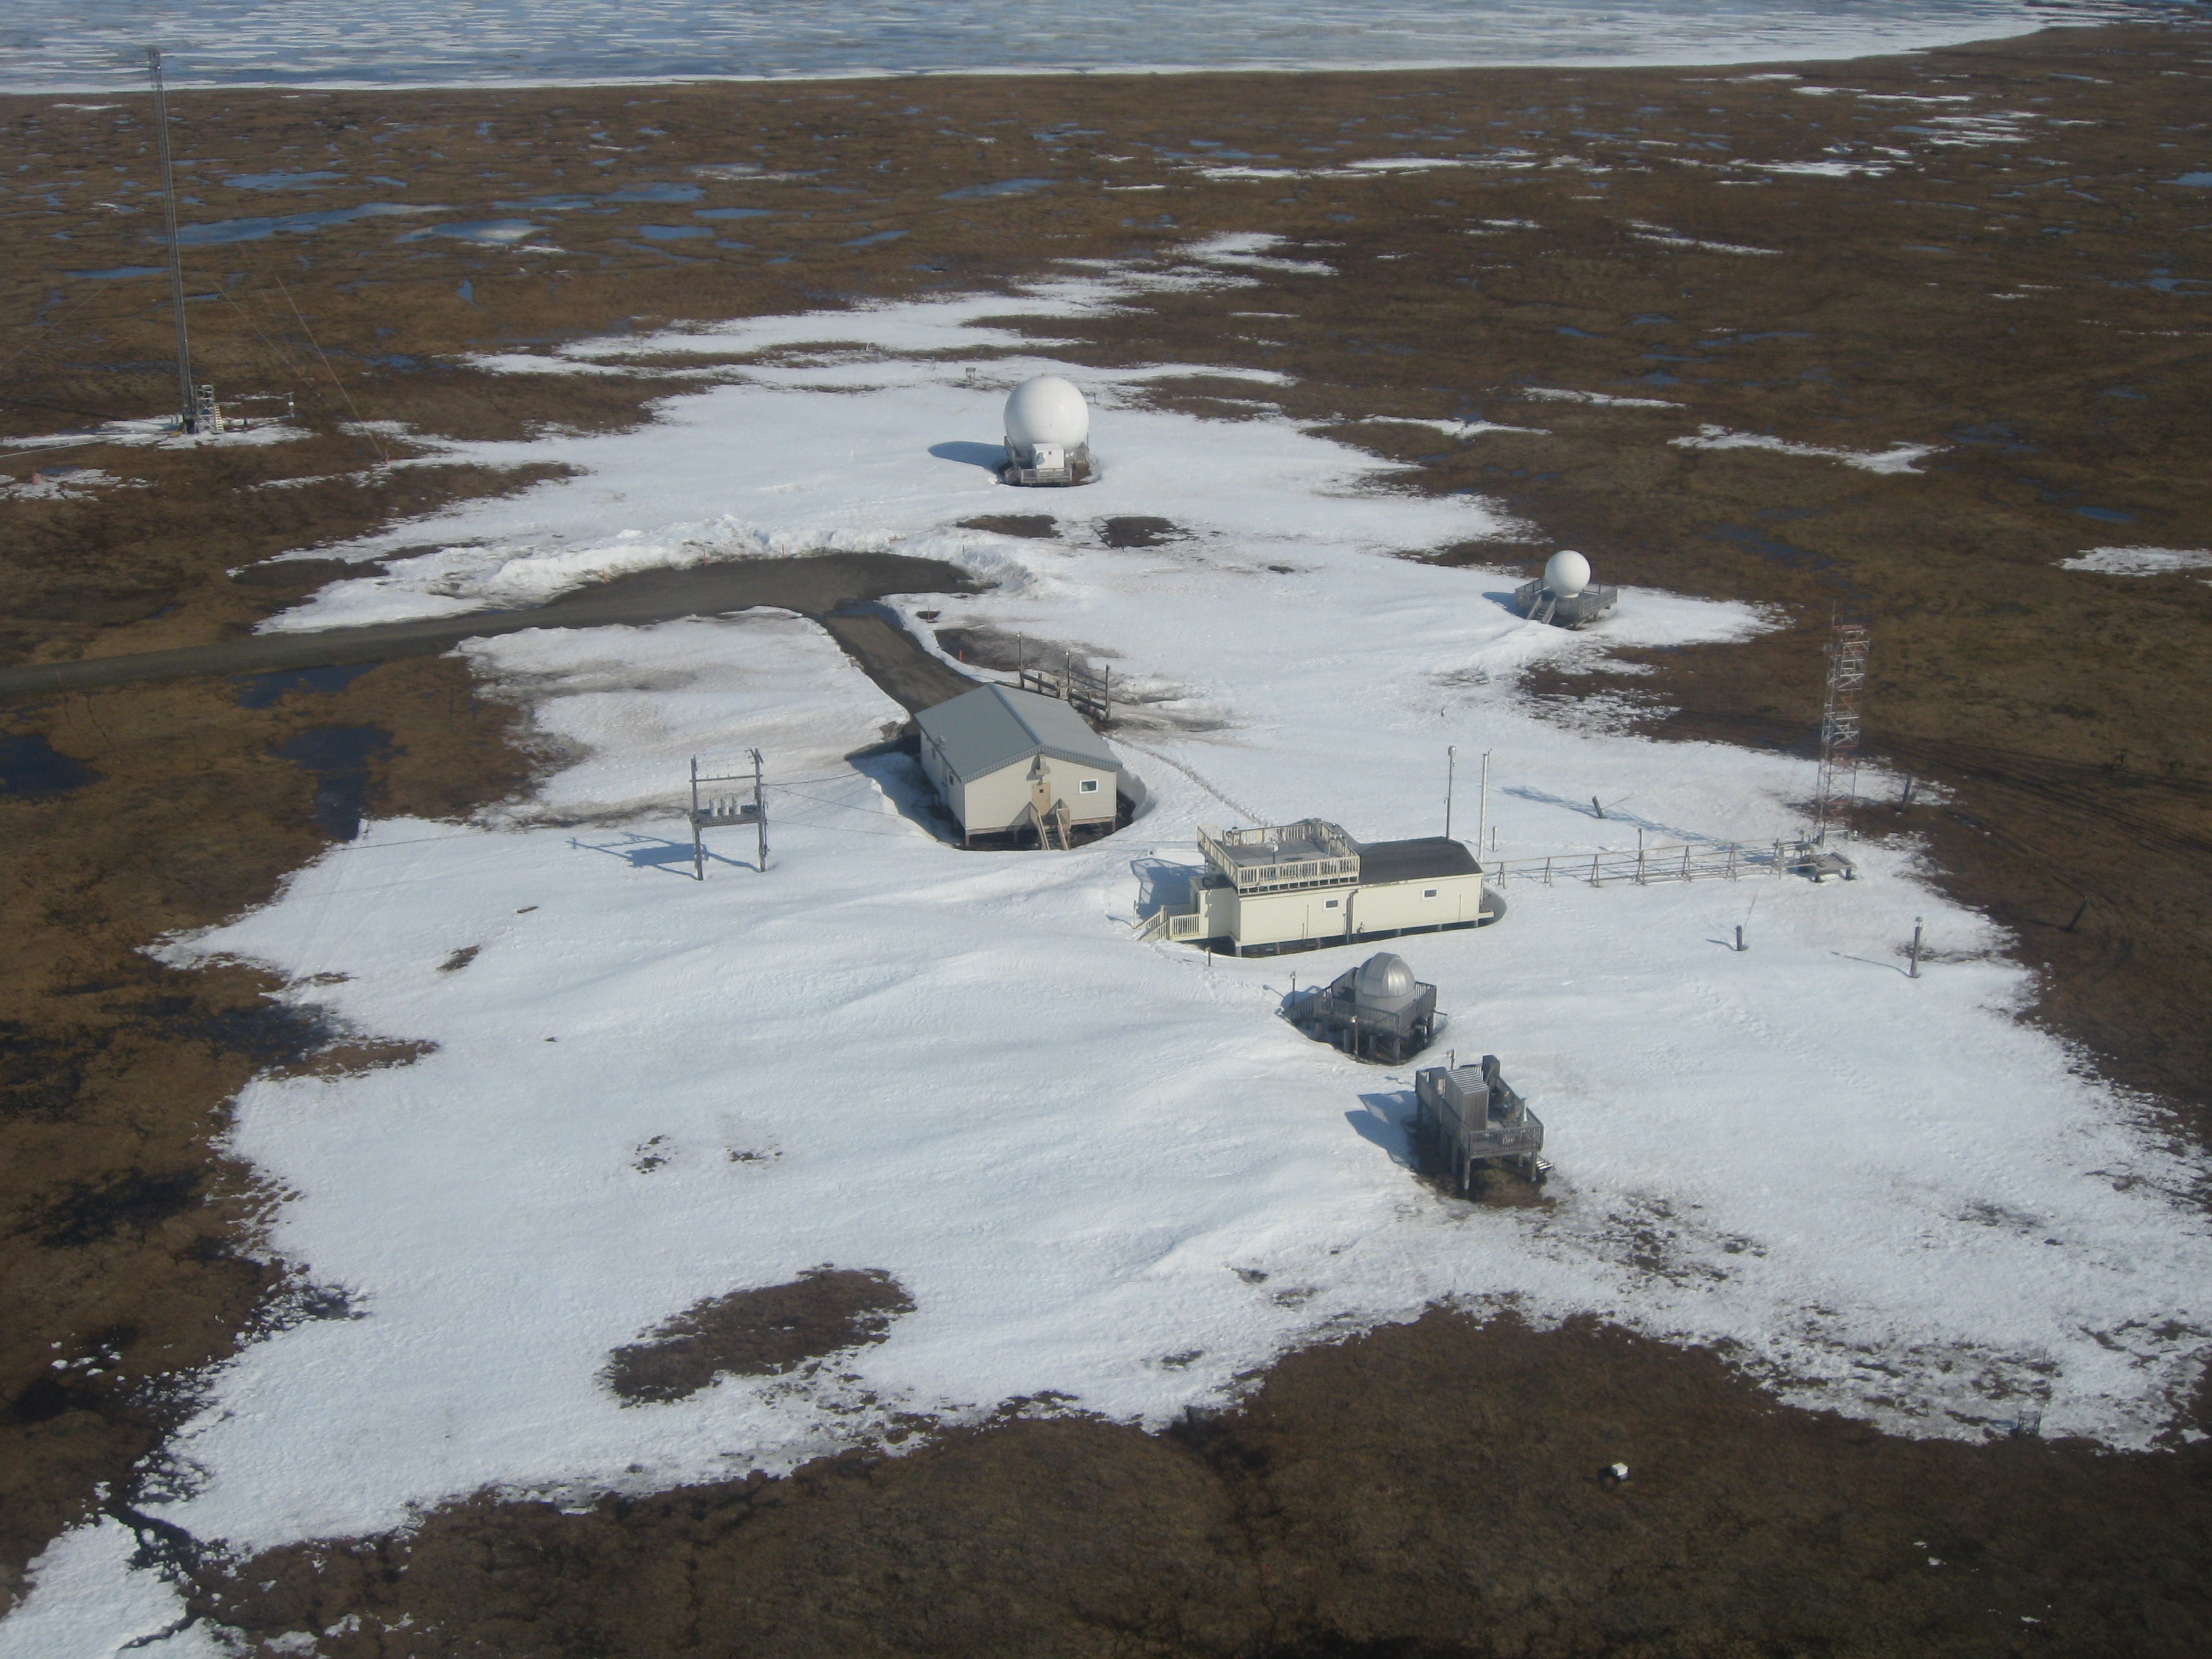 NOAA's Barrow, Alaska Observatory, established in 1973, is located on the northern most point of the United States. It measures gases in the atmosphere that drive climate change, stratospheric ozone depletion, and baseline air quality.